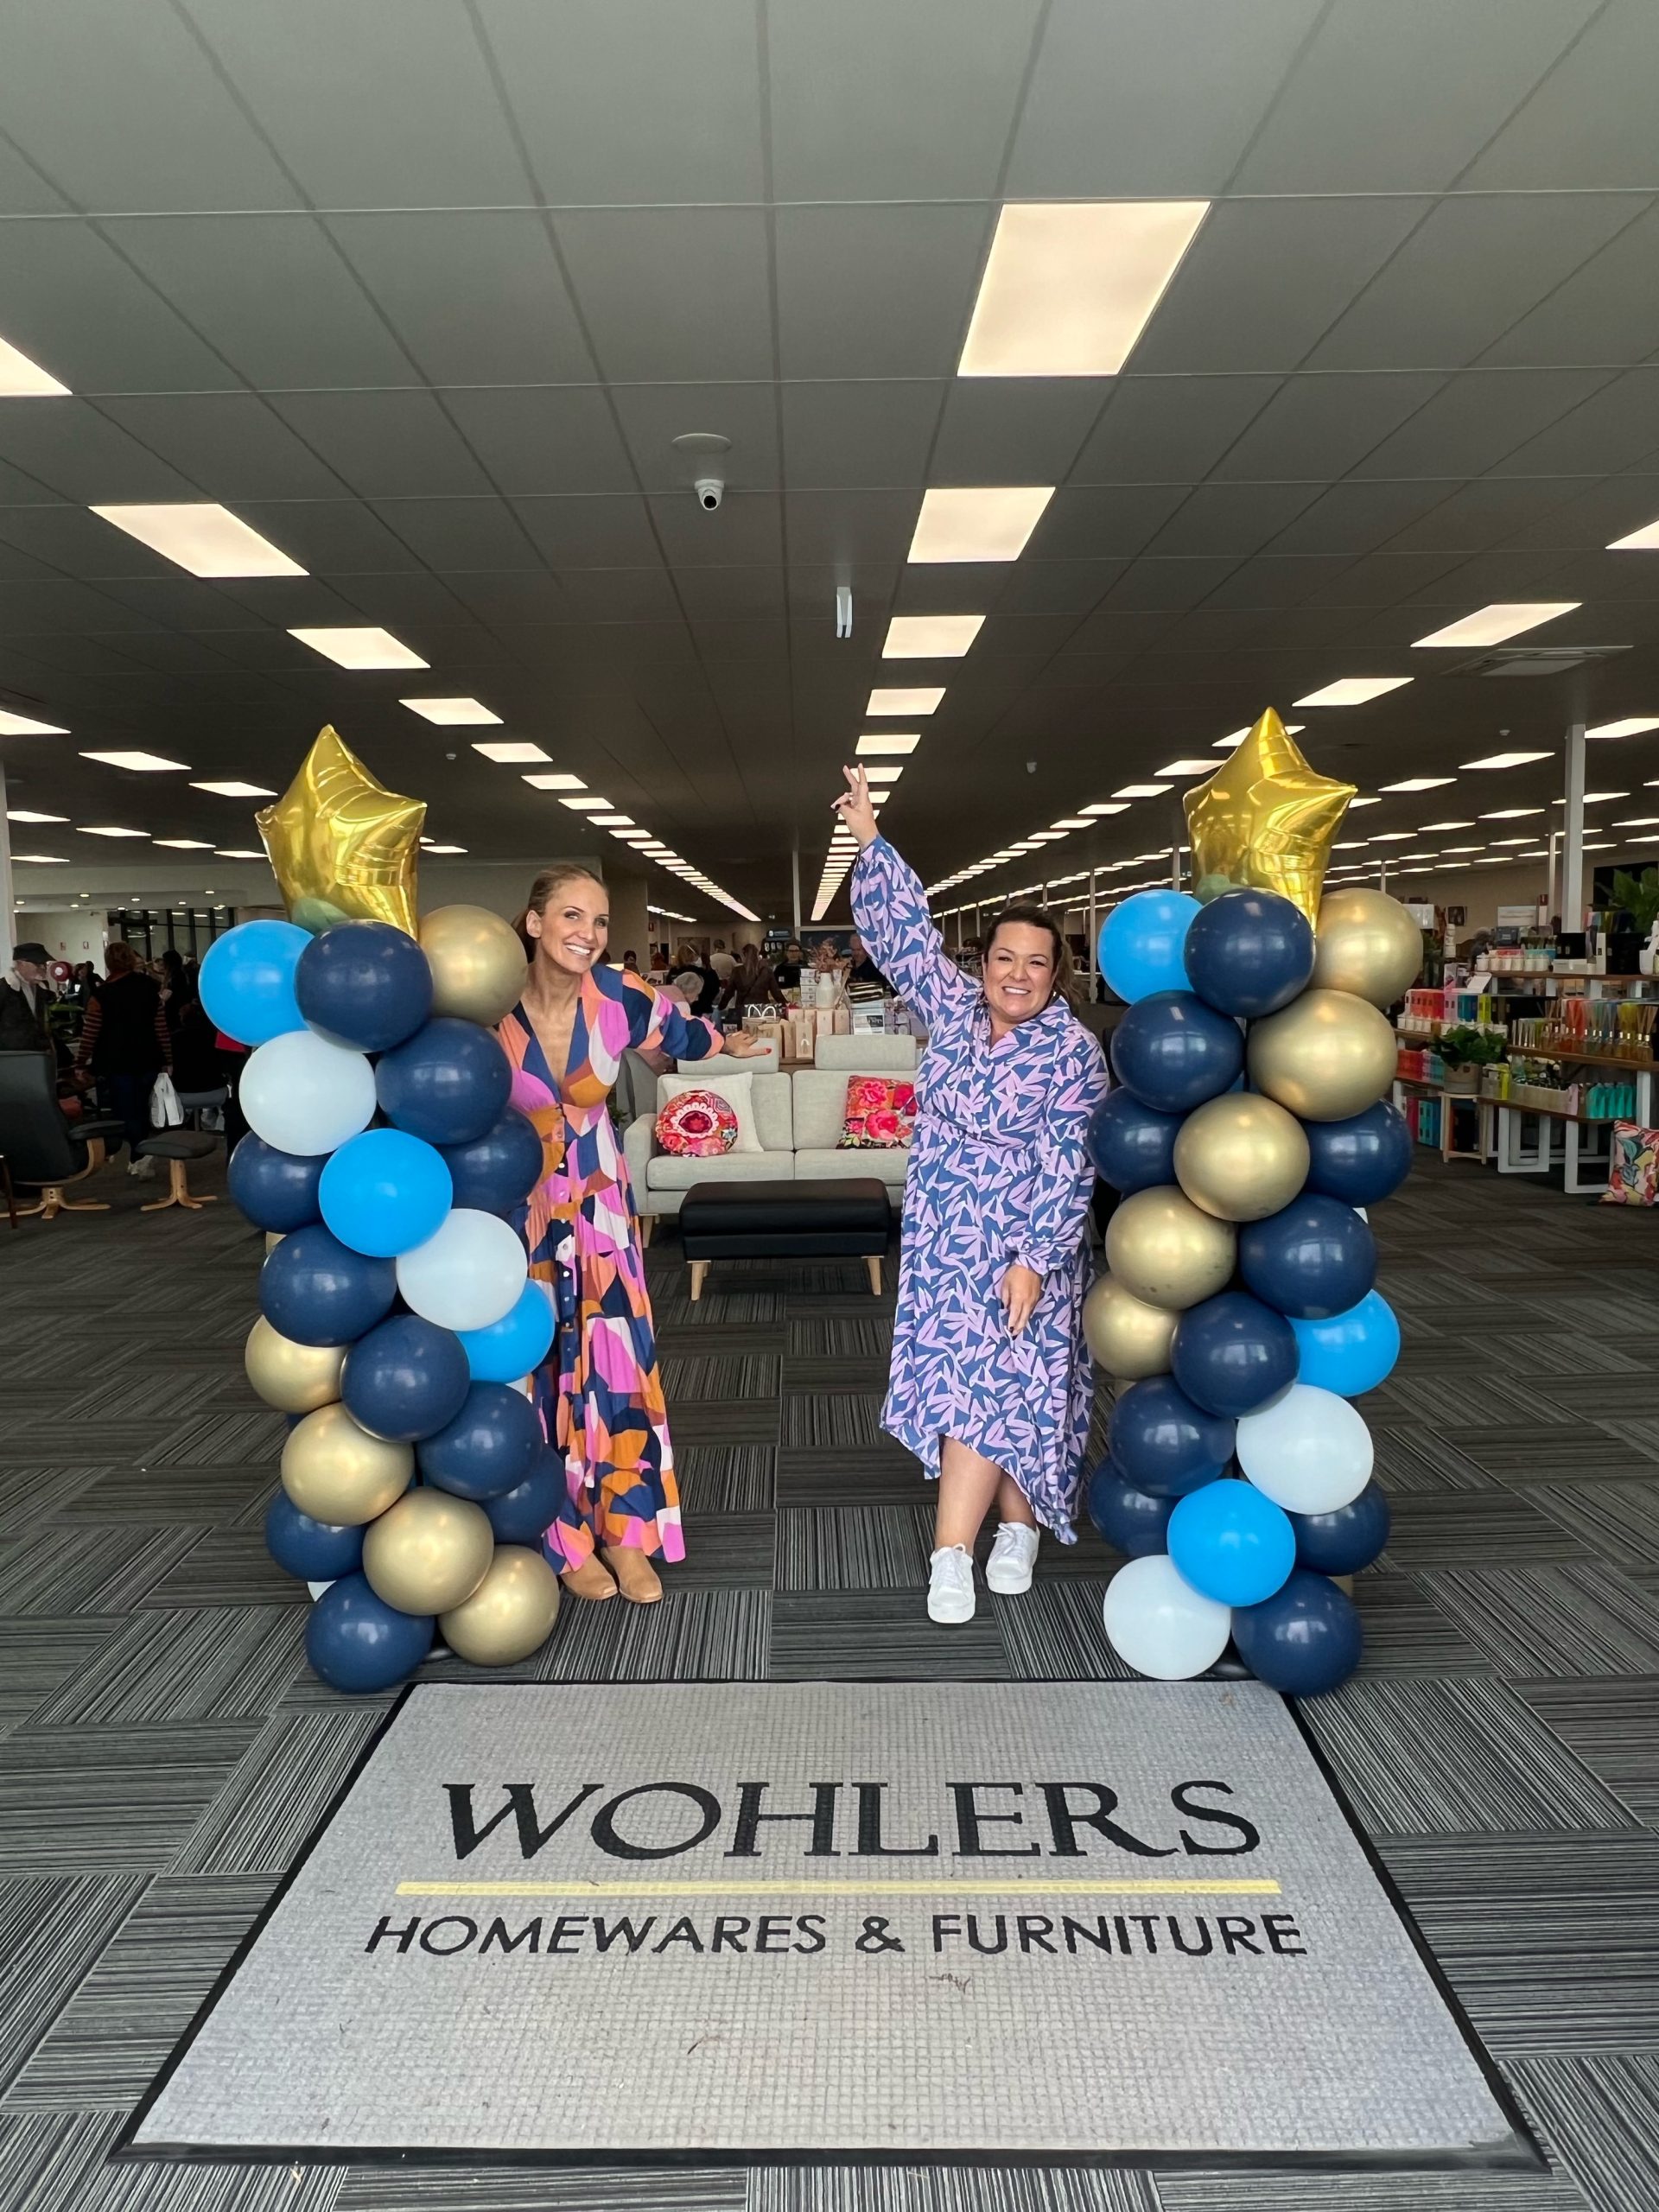 WIN a $500 Wohlers Voucher to Celebrate the Brand New Victor Harbor Store!